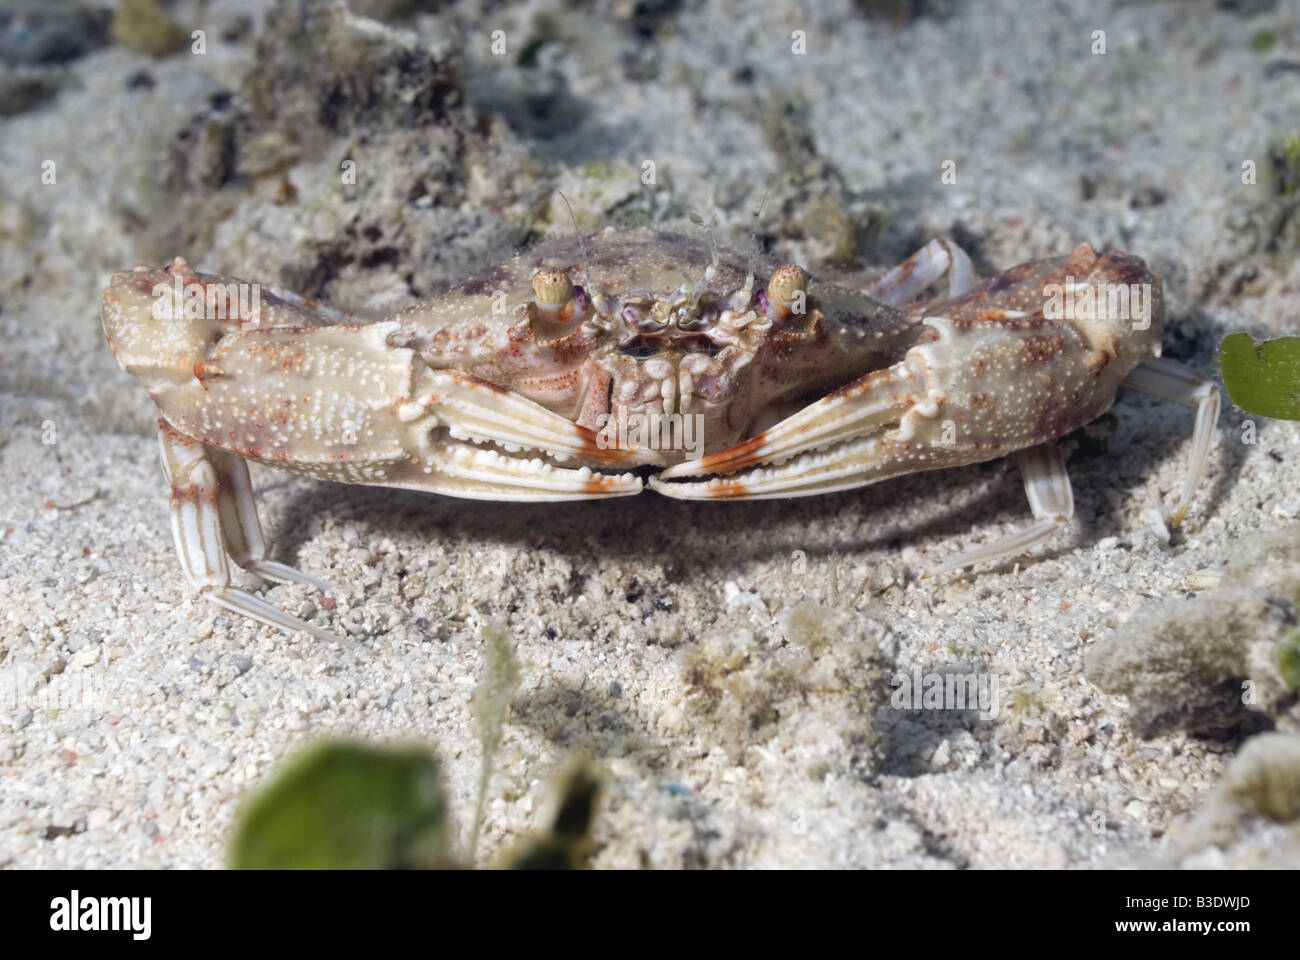 Swimming crab sitting among the sea grass in shallow water Stock Photo